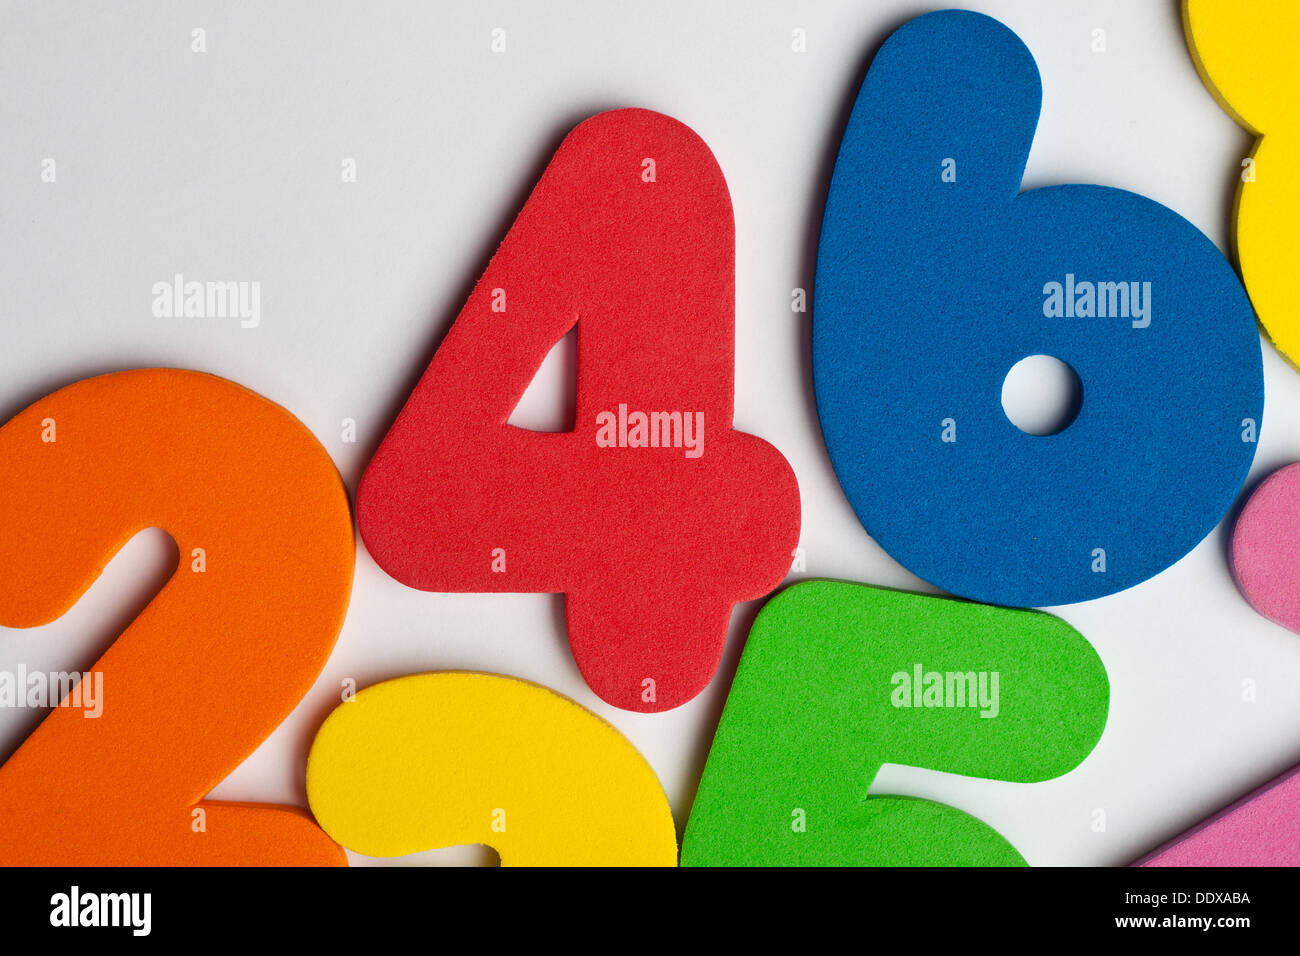 Colorful Foam Numbers On Green Background Stock Photo 120356005